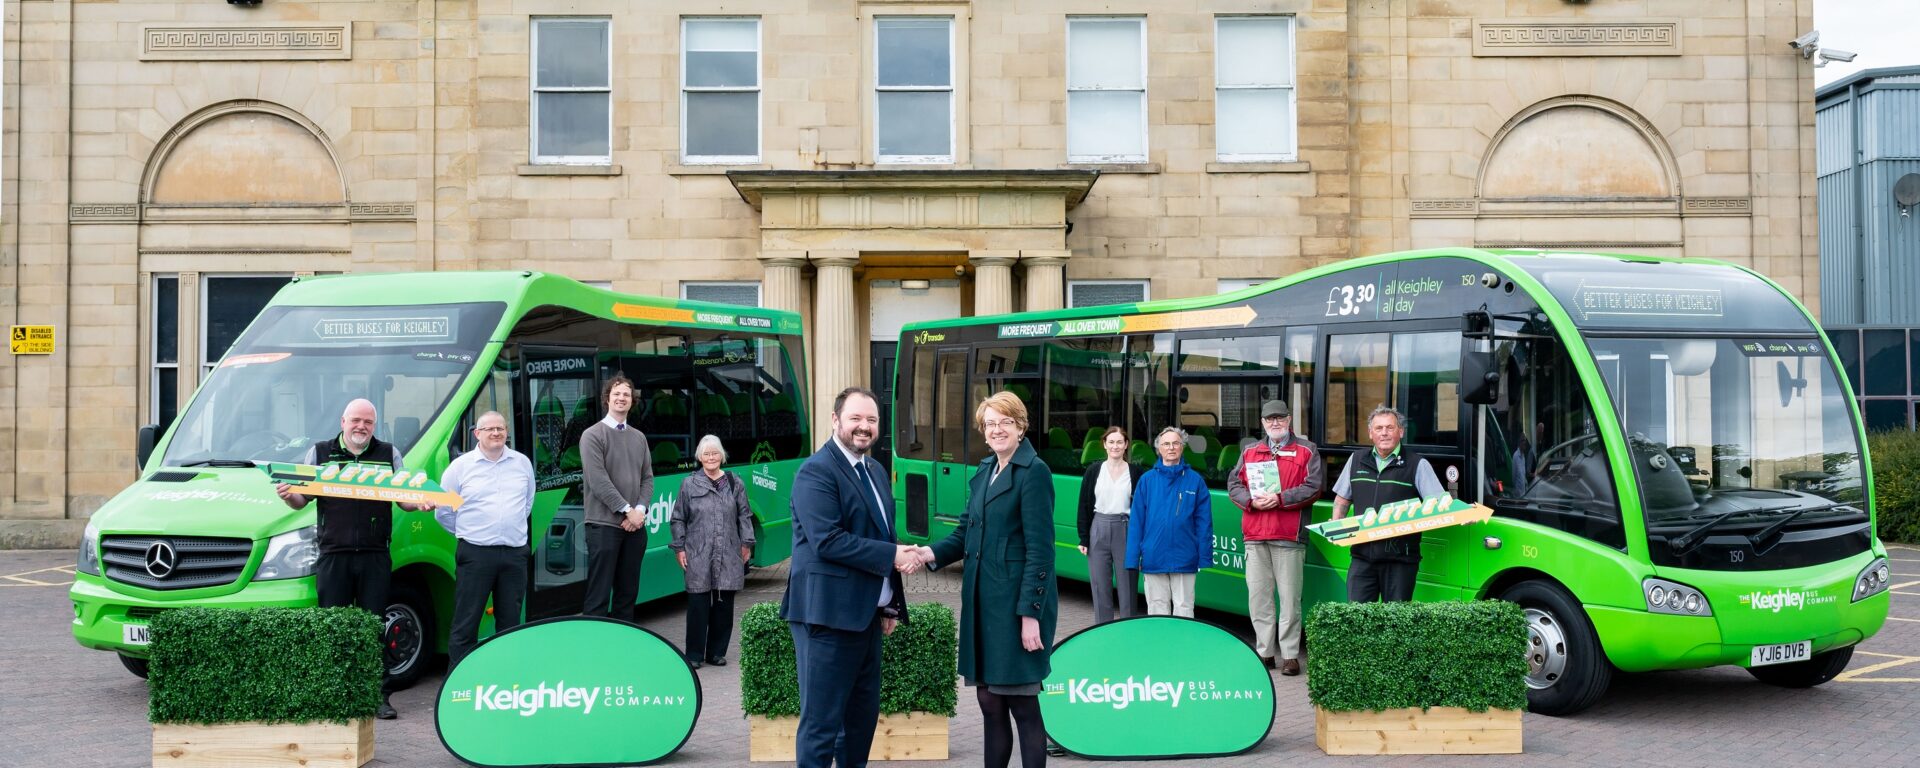 Keighley Bus Company